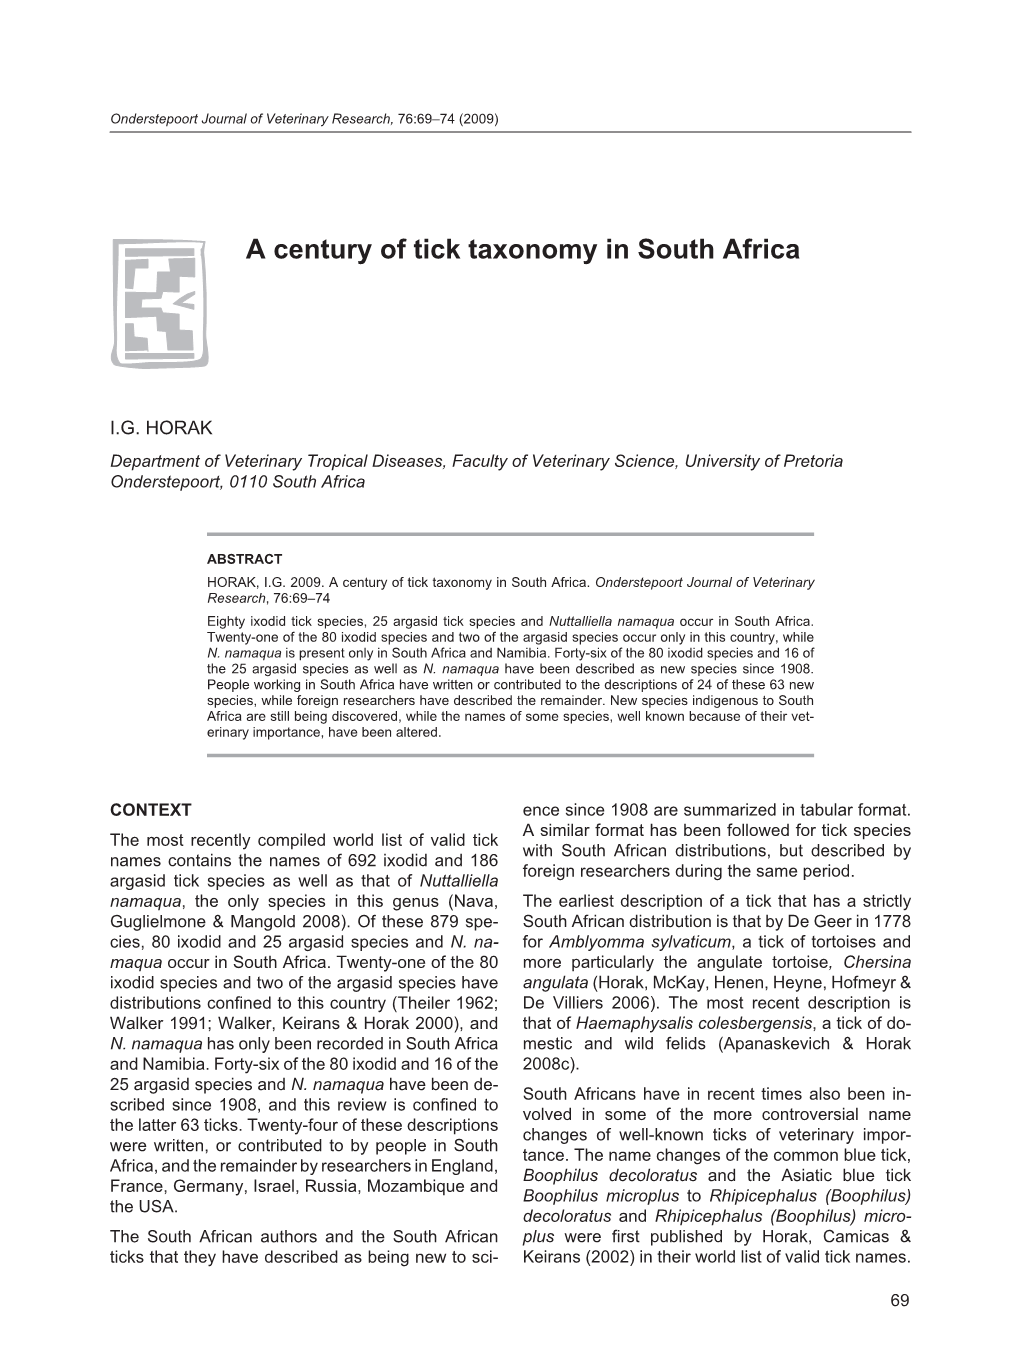 A Century of Tick Taxonomy in South Africa